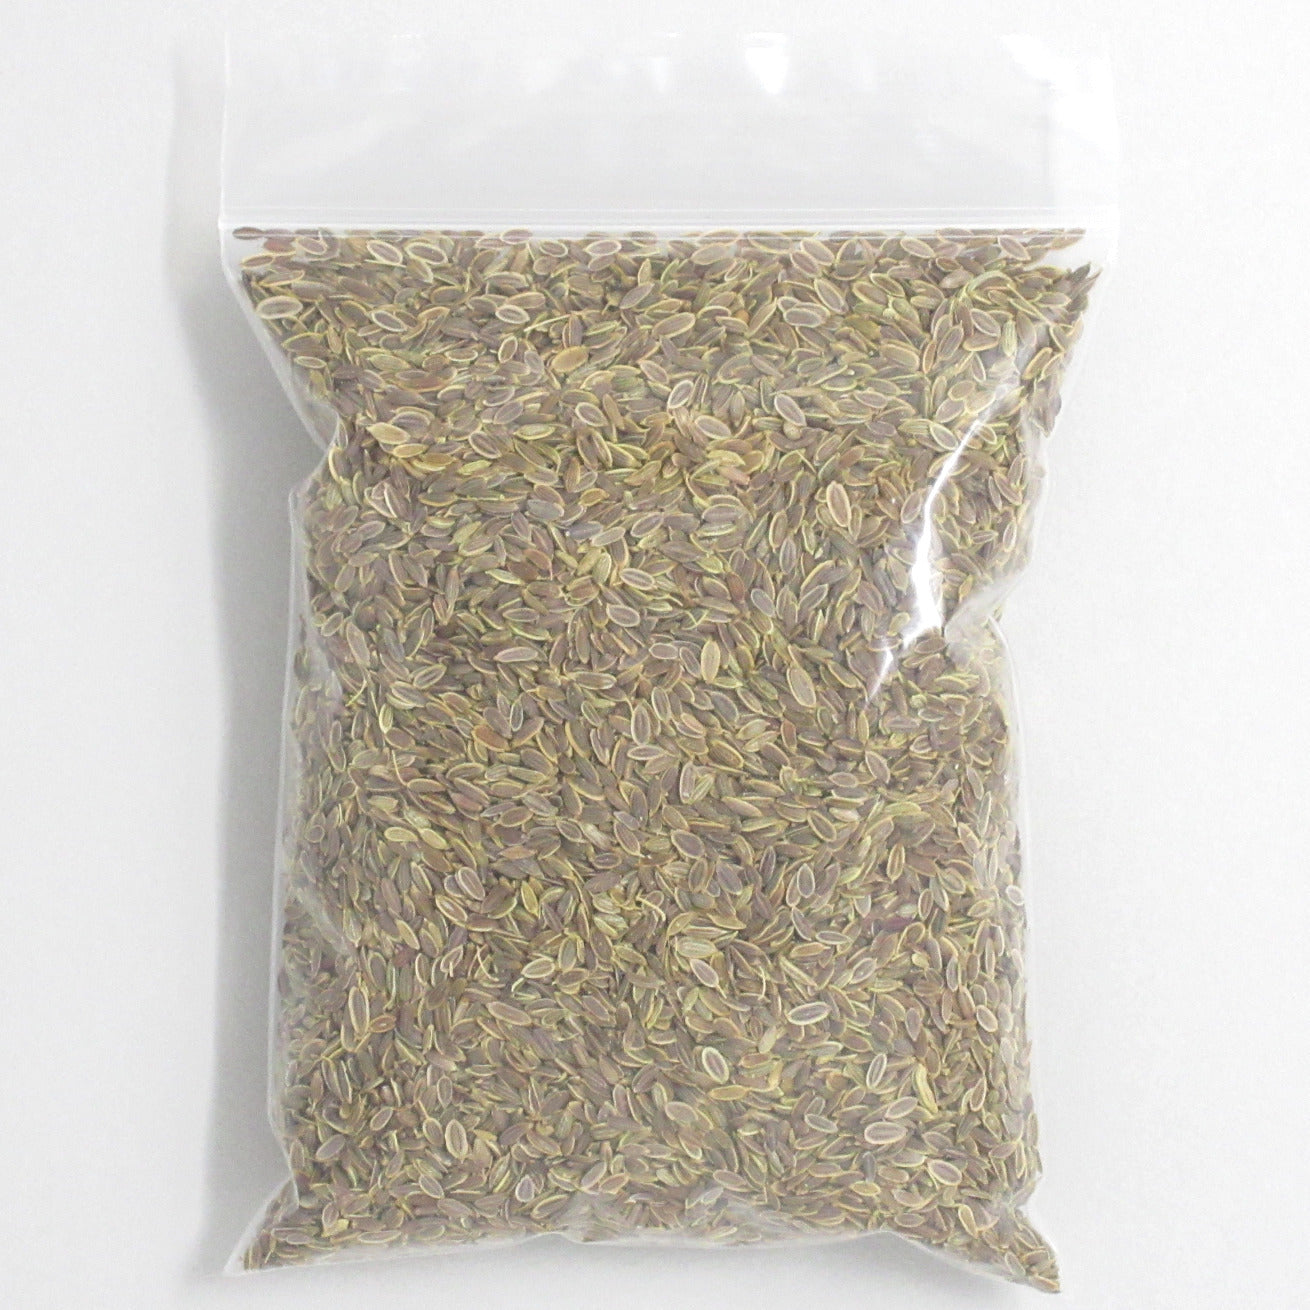 Flour Barrel product image - Dill Seed